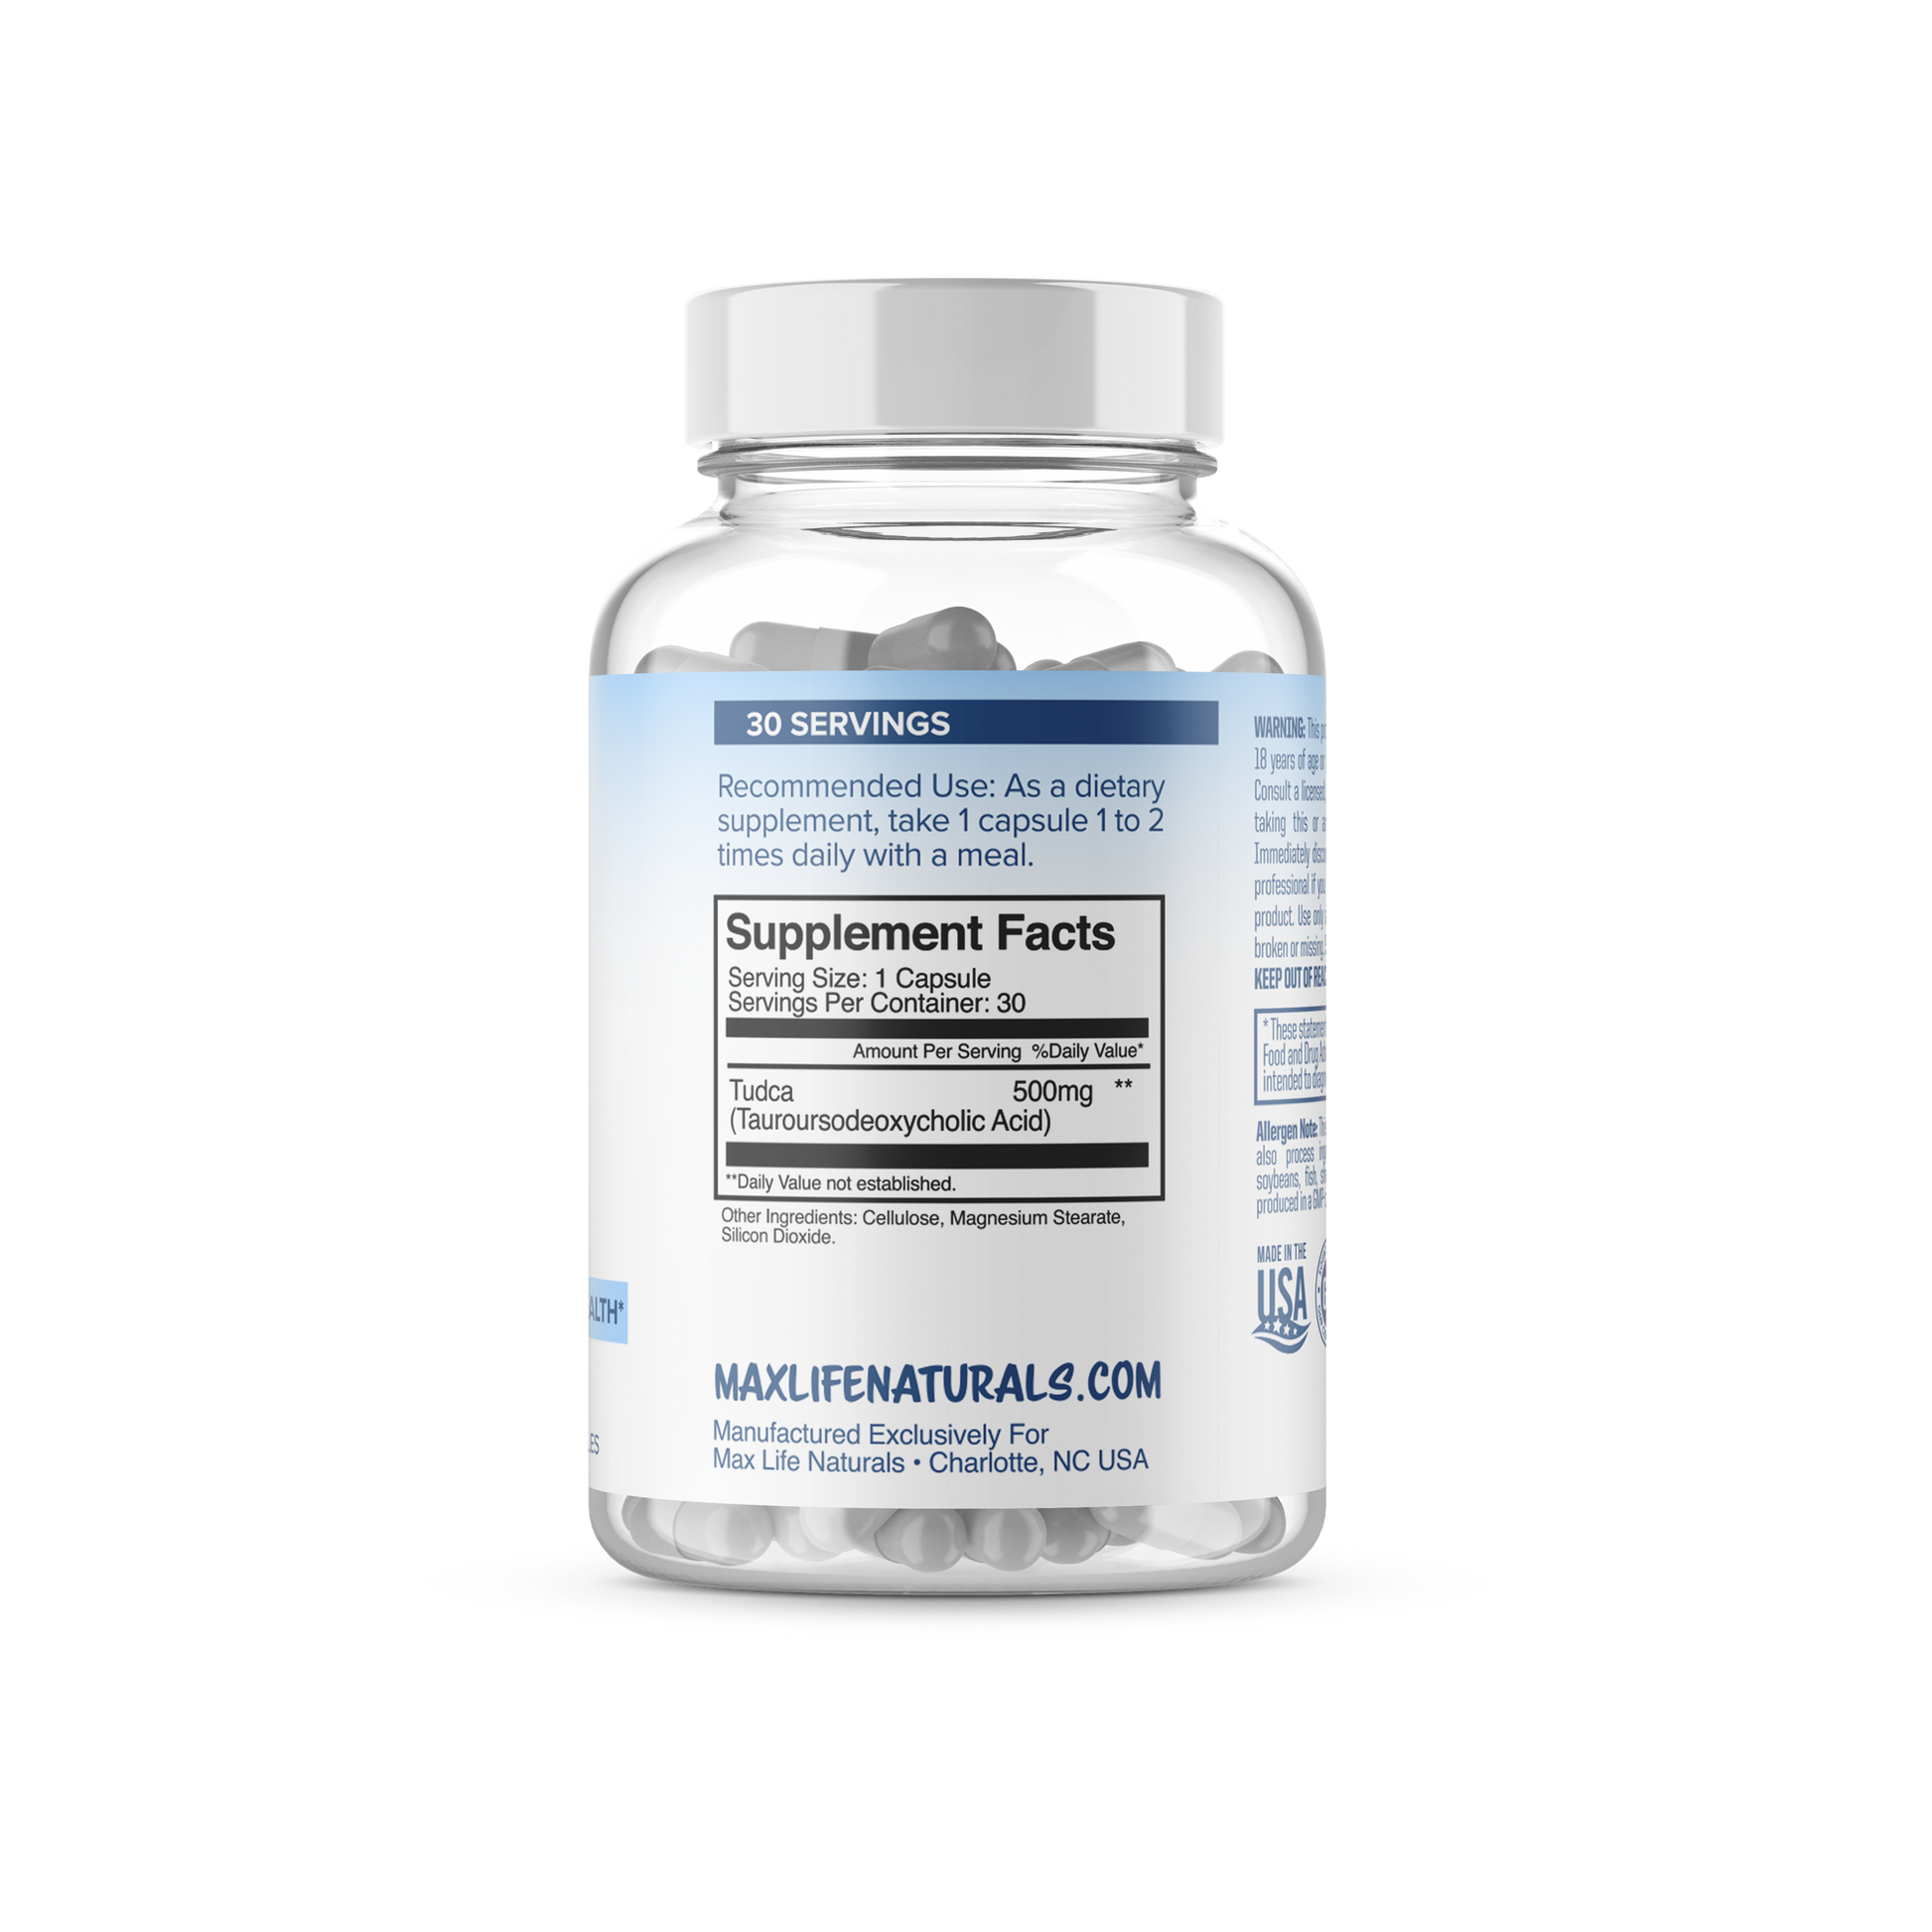 Tudca 500mg 30 Day  -  Liver and Nerve Cell Support